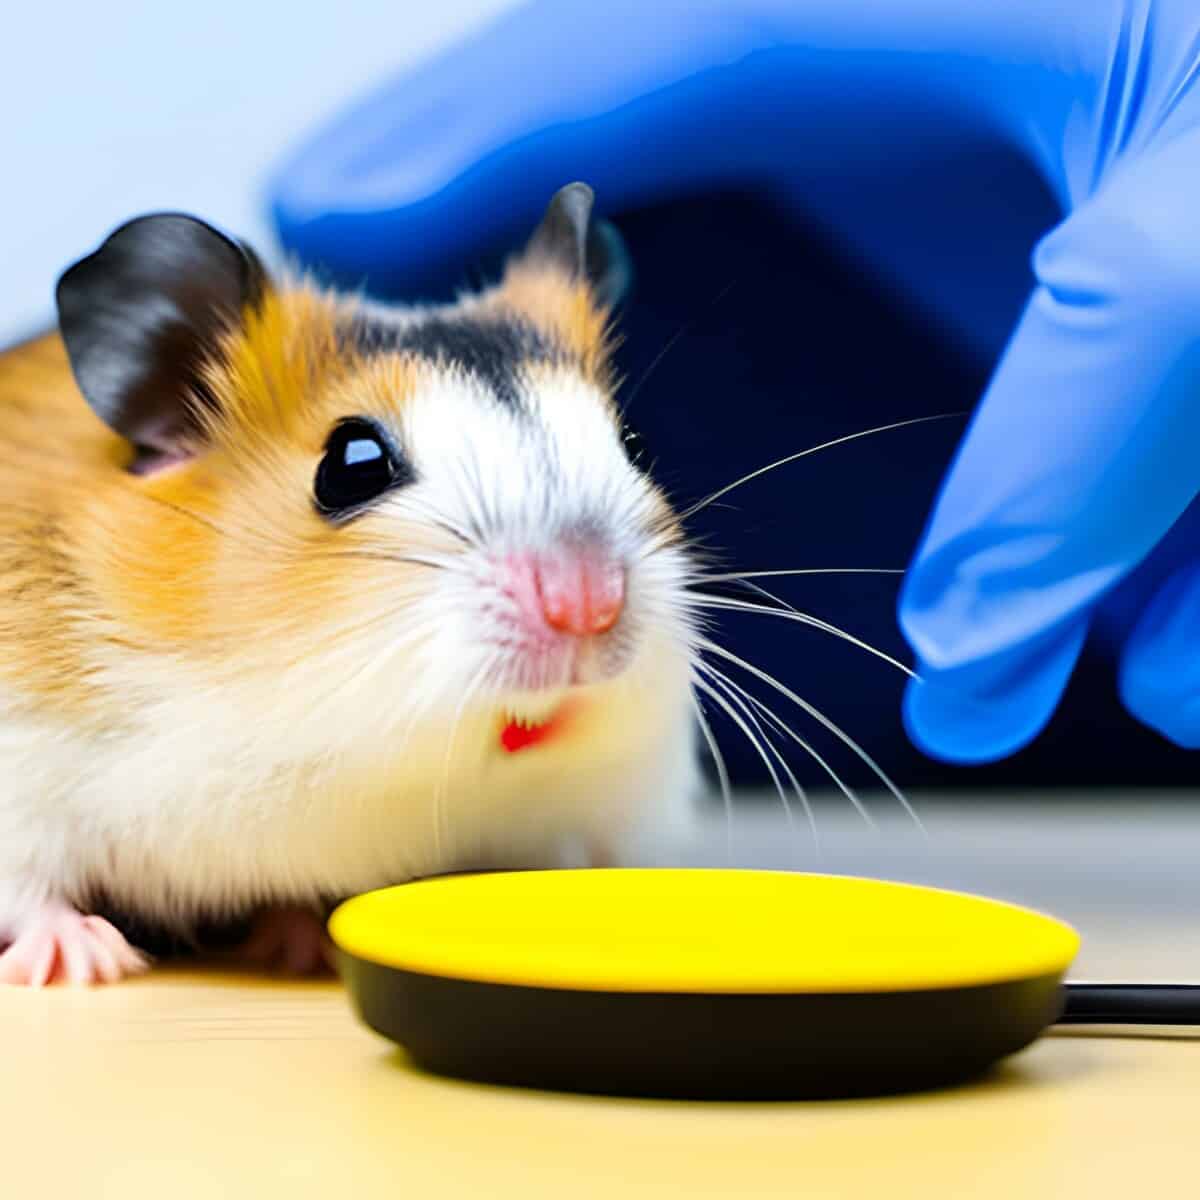 hamster with eye infection in vets office. A vets hand with gloves is looking at the hamster.